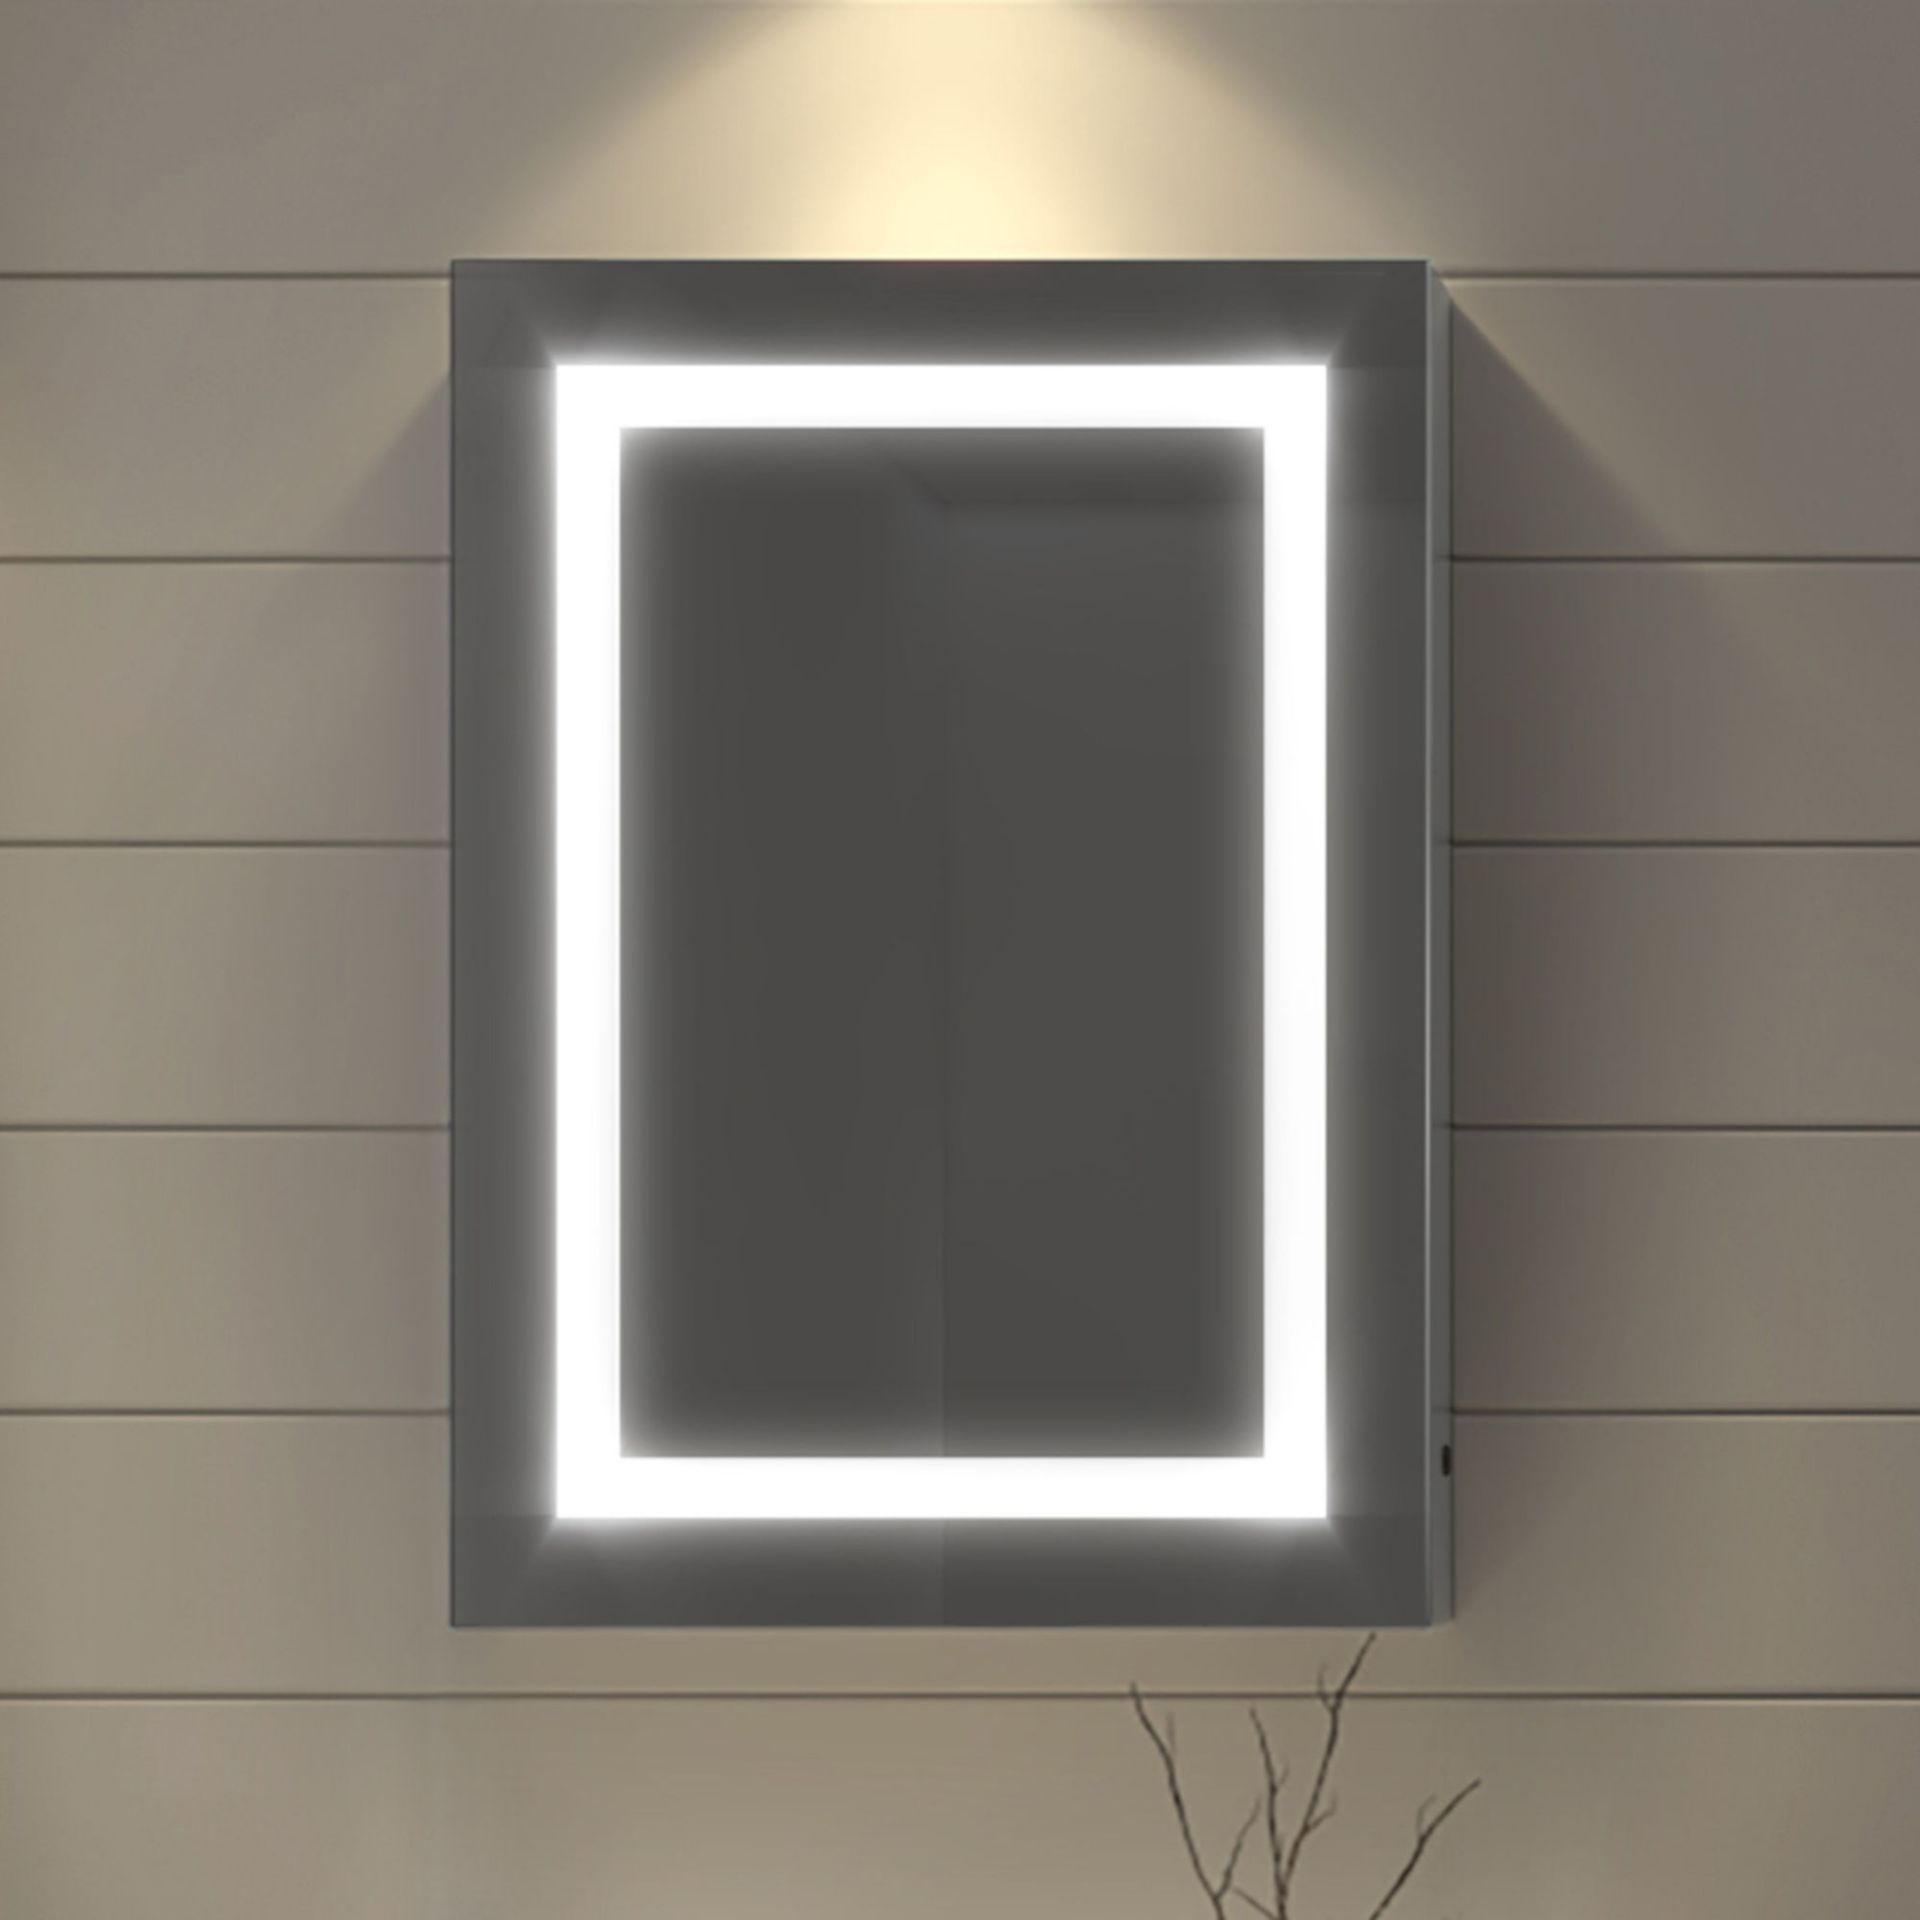 (EY46) 500x700 Nova Illuminated LED Mirror Cabinet. RRP £624.99. We love this mirror cabinet as it